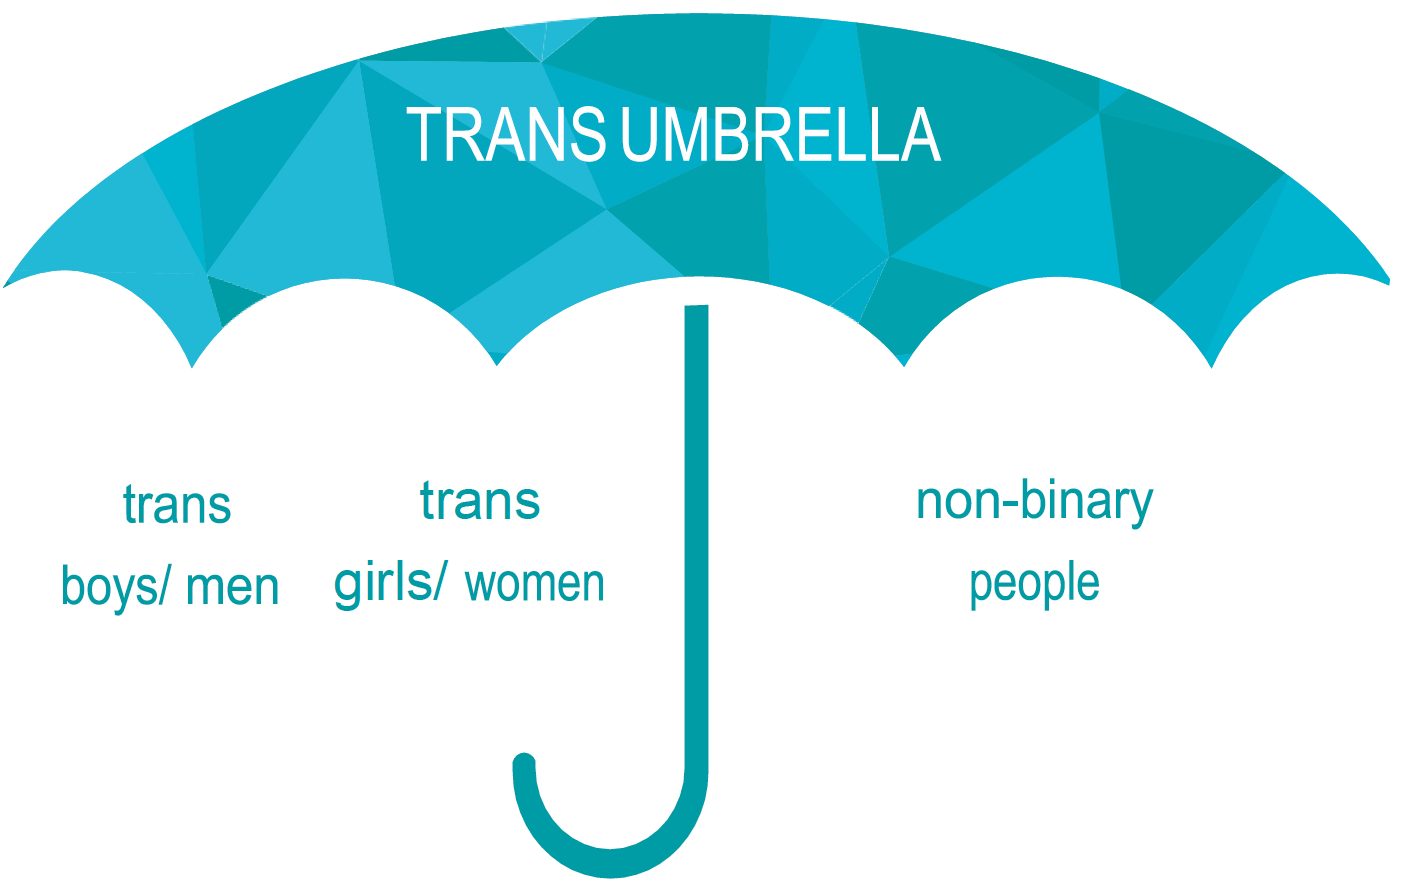 An image of an open umbrella, it is covered in aqua and green triangles. The word Trans Umbrella is in the centre of the open umbrella in white writing.  Under the Umbrella are the words trans boys/men, trans women/girls, and, non-binary people in aqua coloured text.